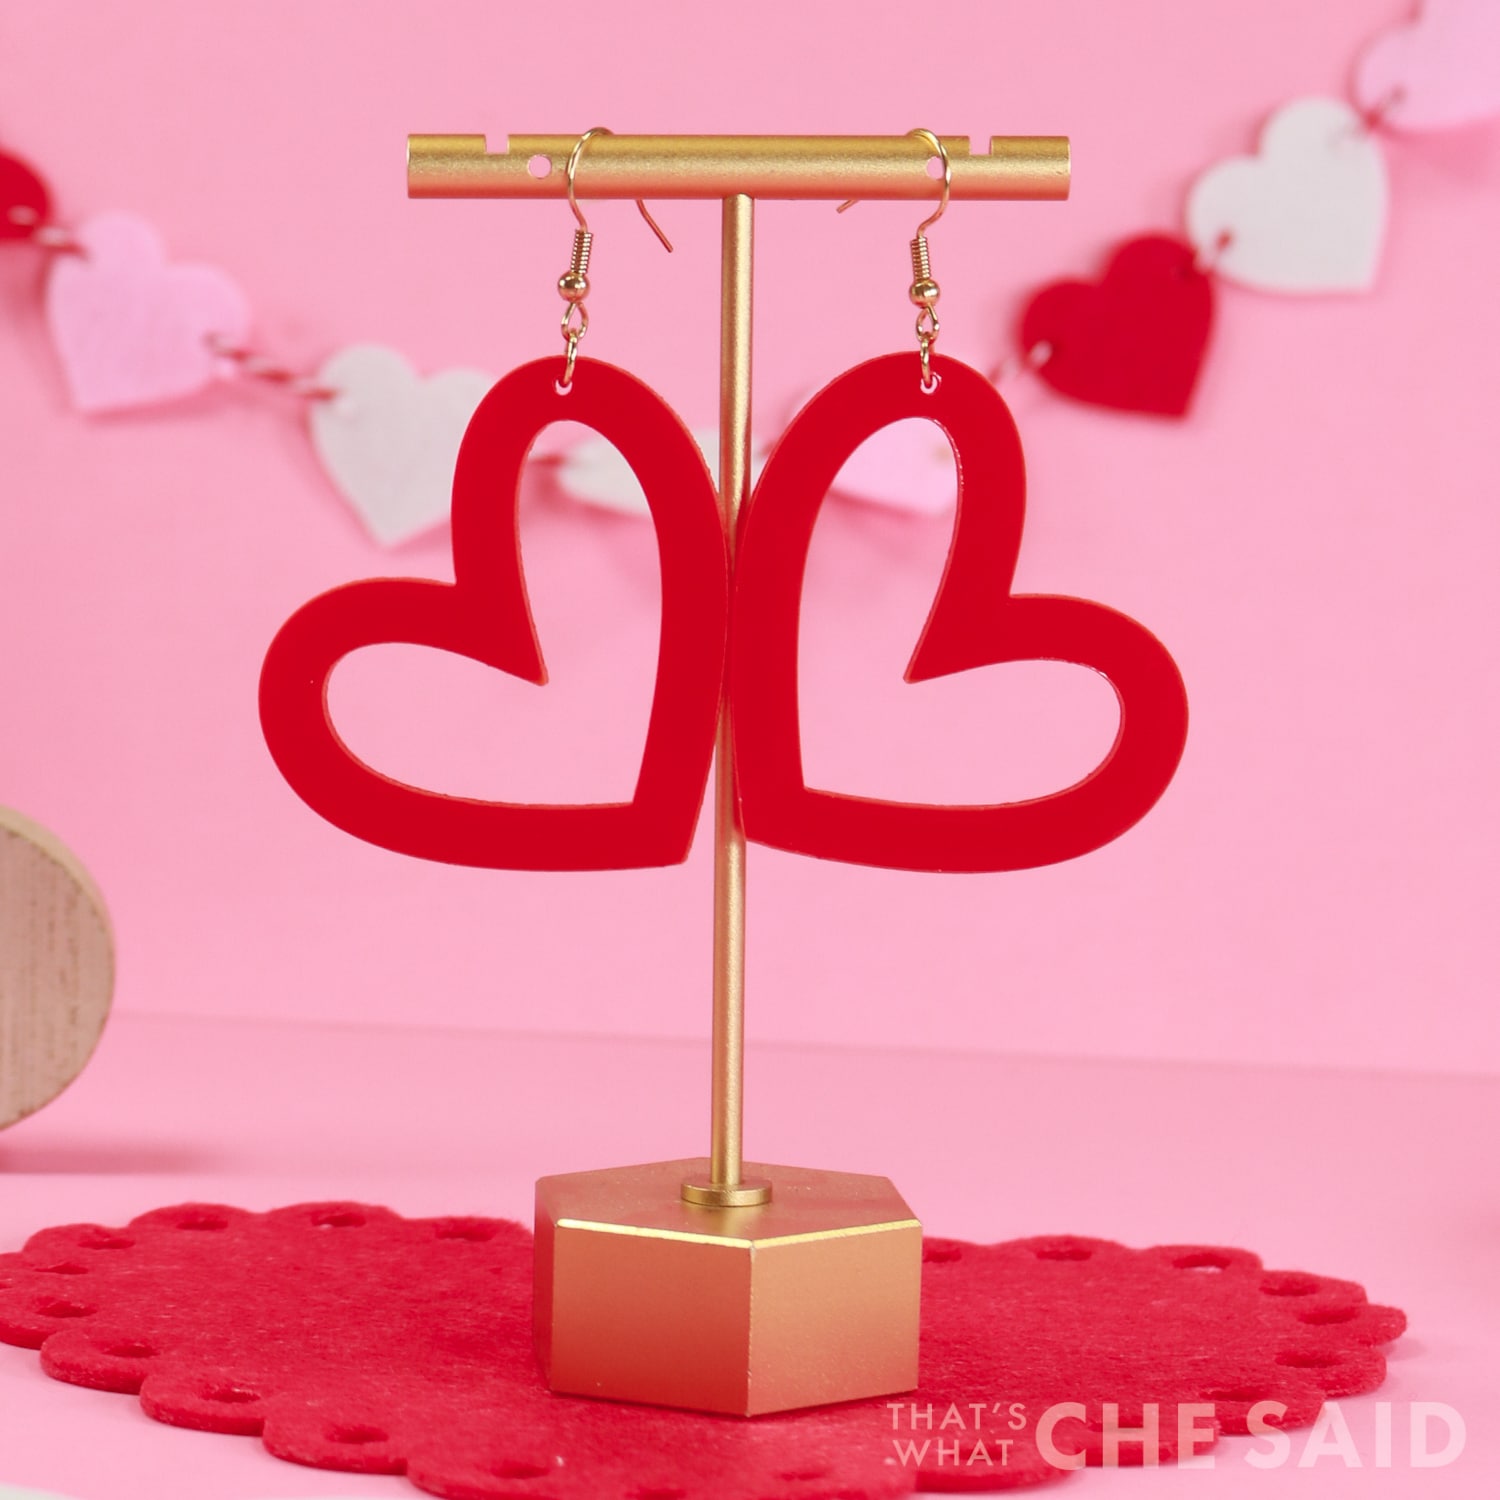 Whimsical Heart earrings cut from acrylic on xtool M1 hanging from earring stand Close up